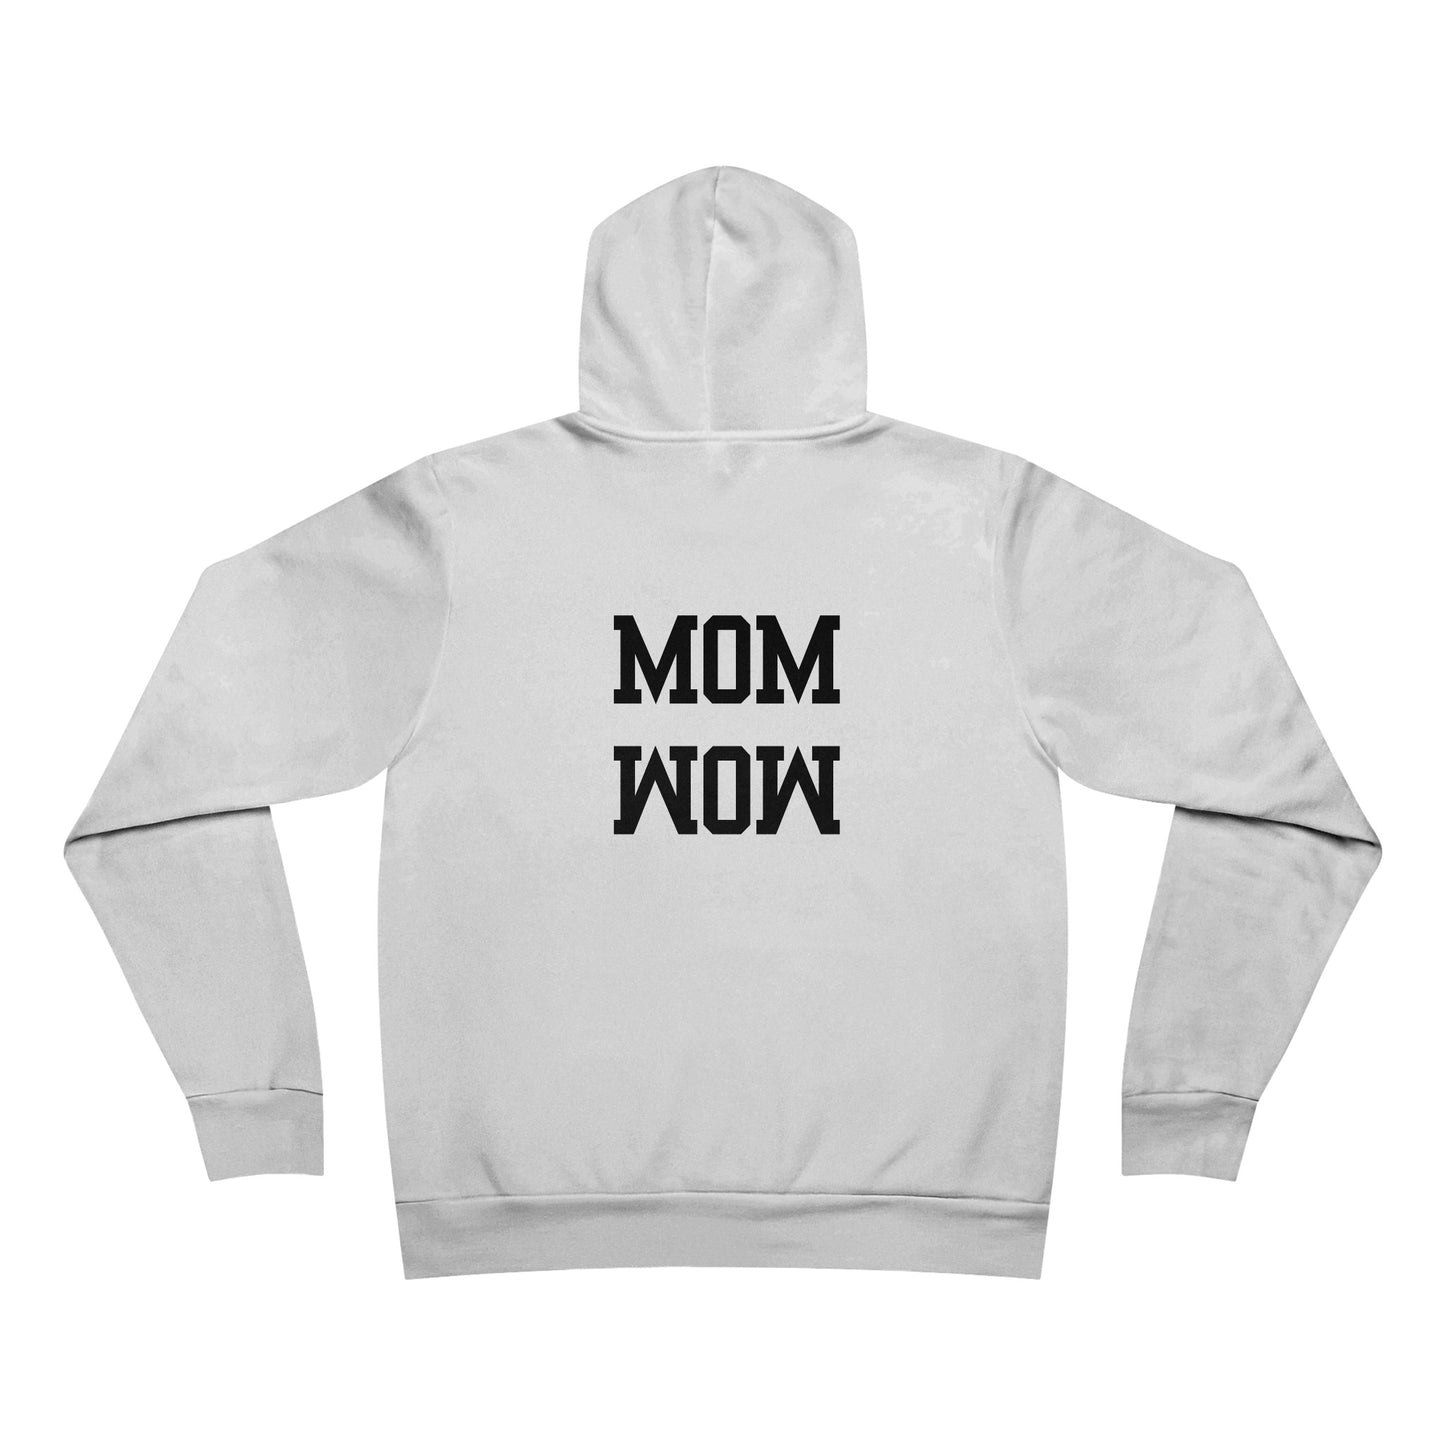 MOM WOW - Unisex Sponge Fleece Pullover Hoodie - Perfect Mother’s Day Gift